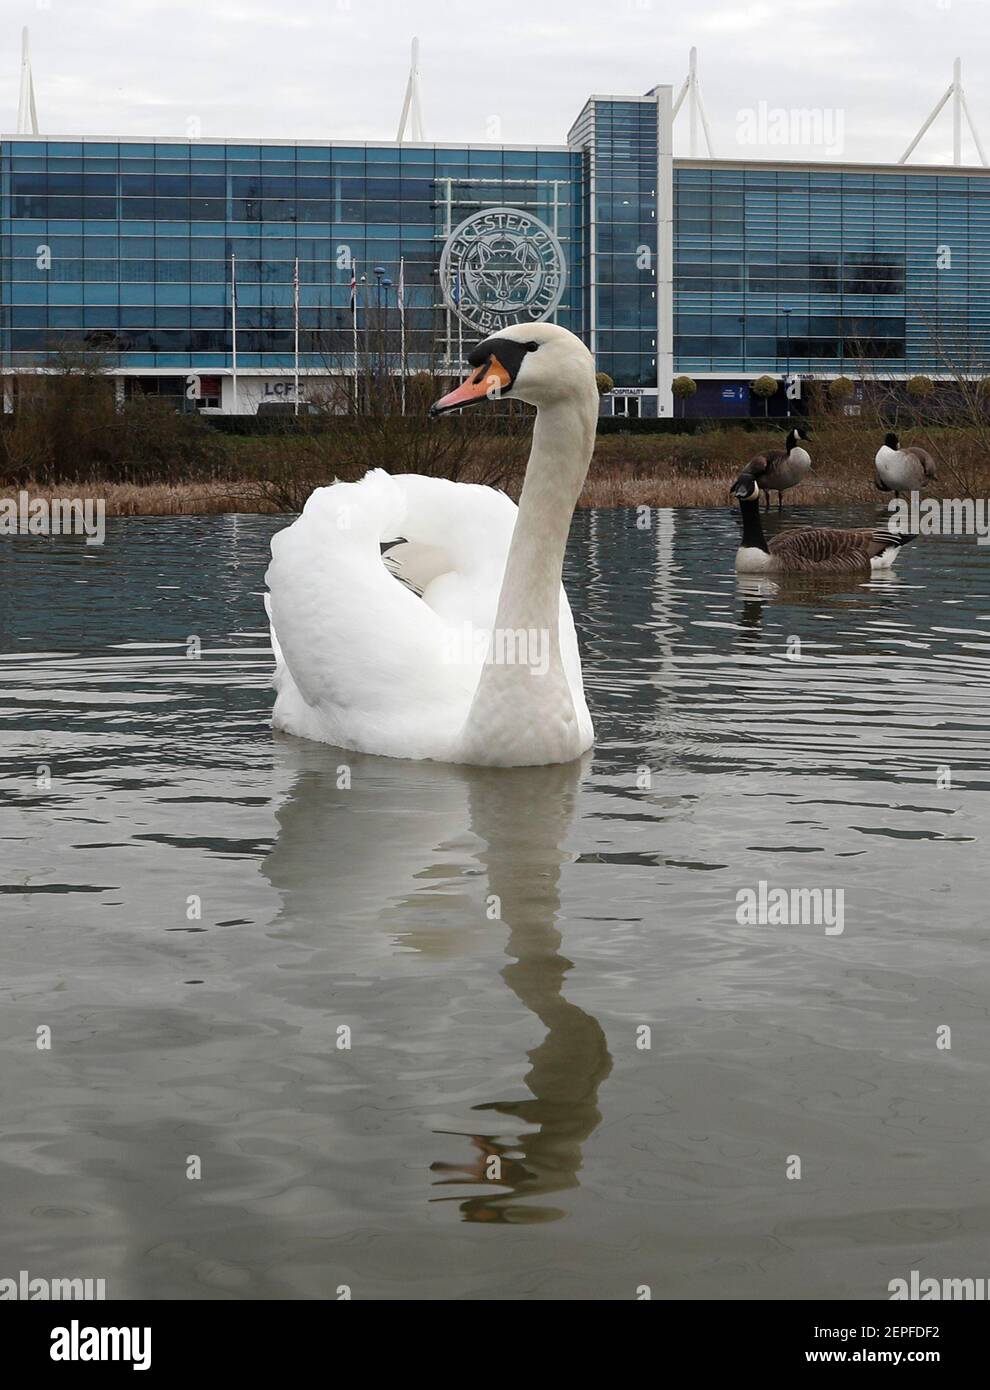 Leicester, Leicestershire, UK. 22nd February 2021. A swan swims on the River Soar by the King Power Stadium, the home of Leicester City. Credit Darren Stock Photo